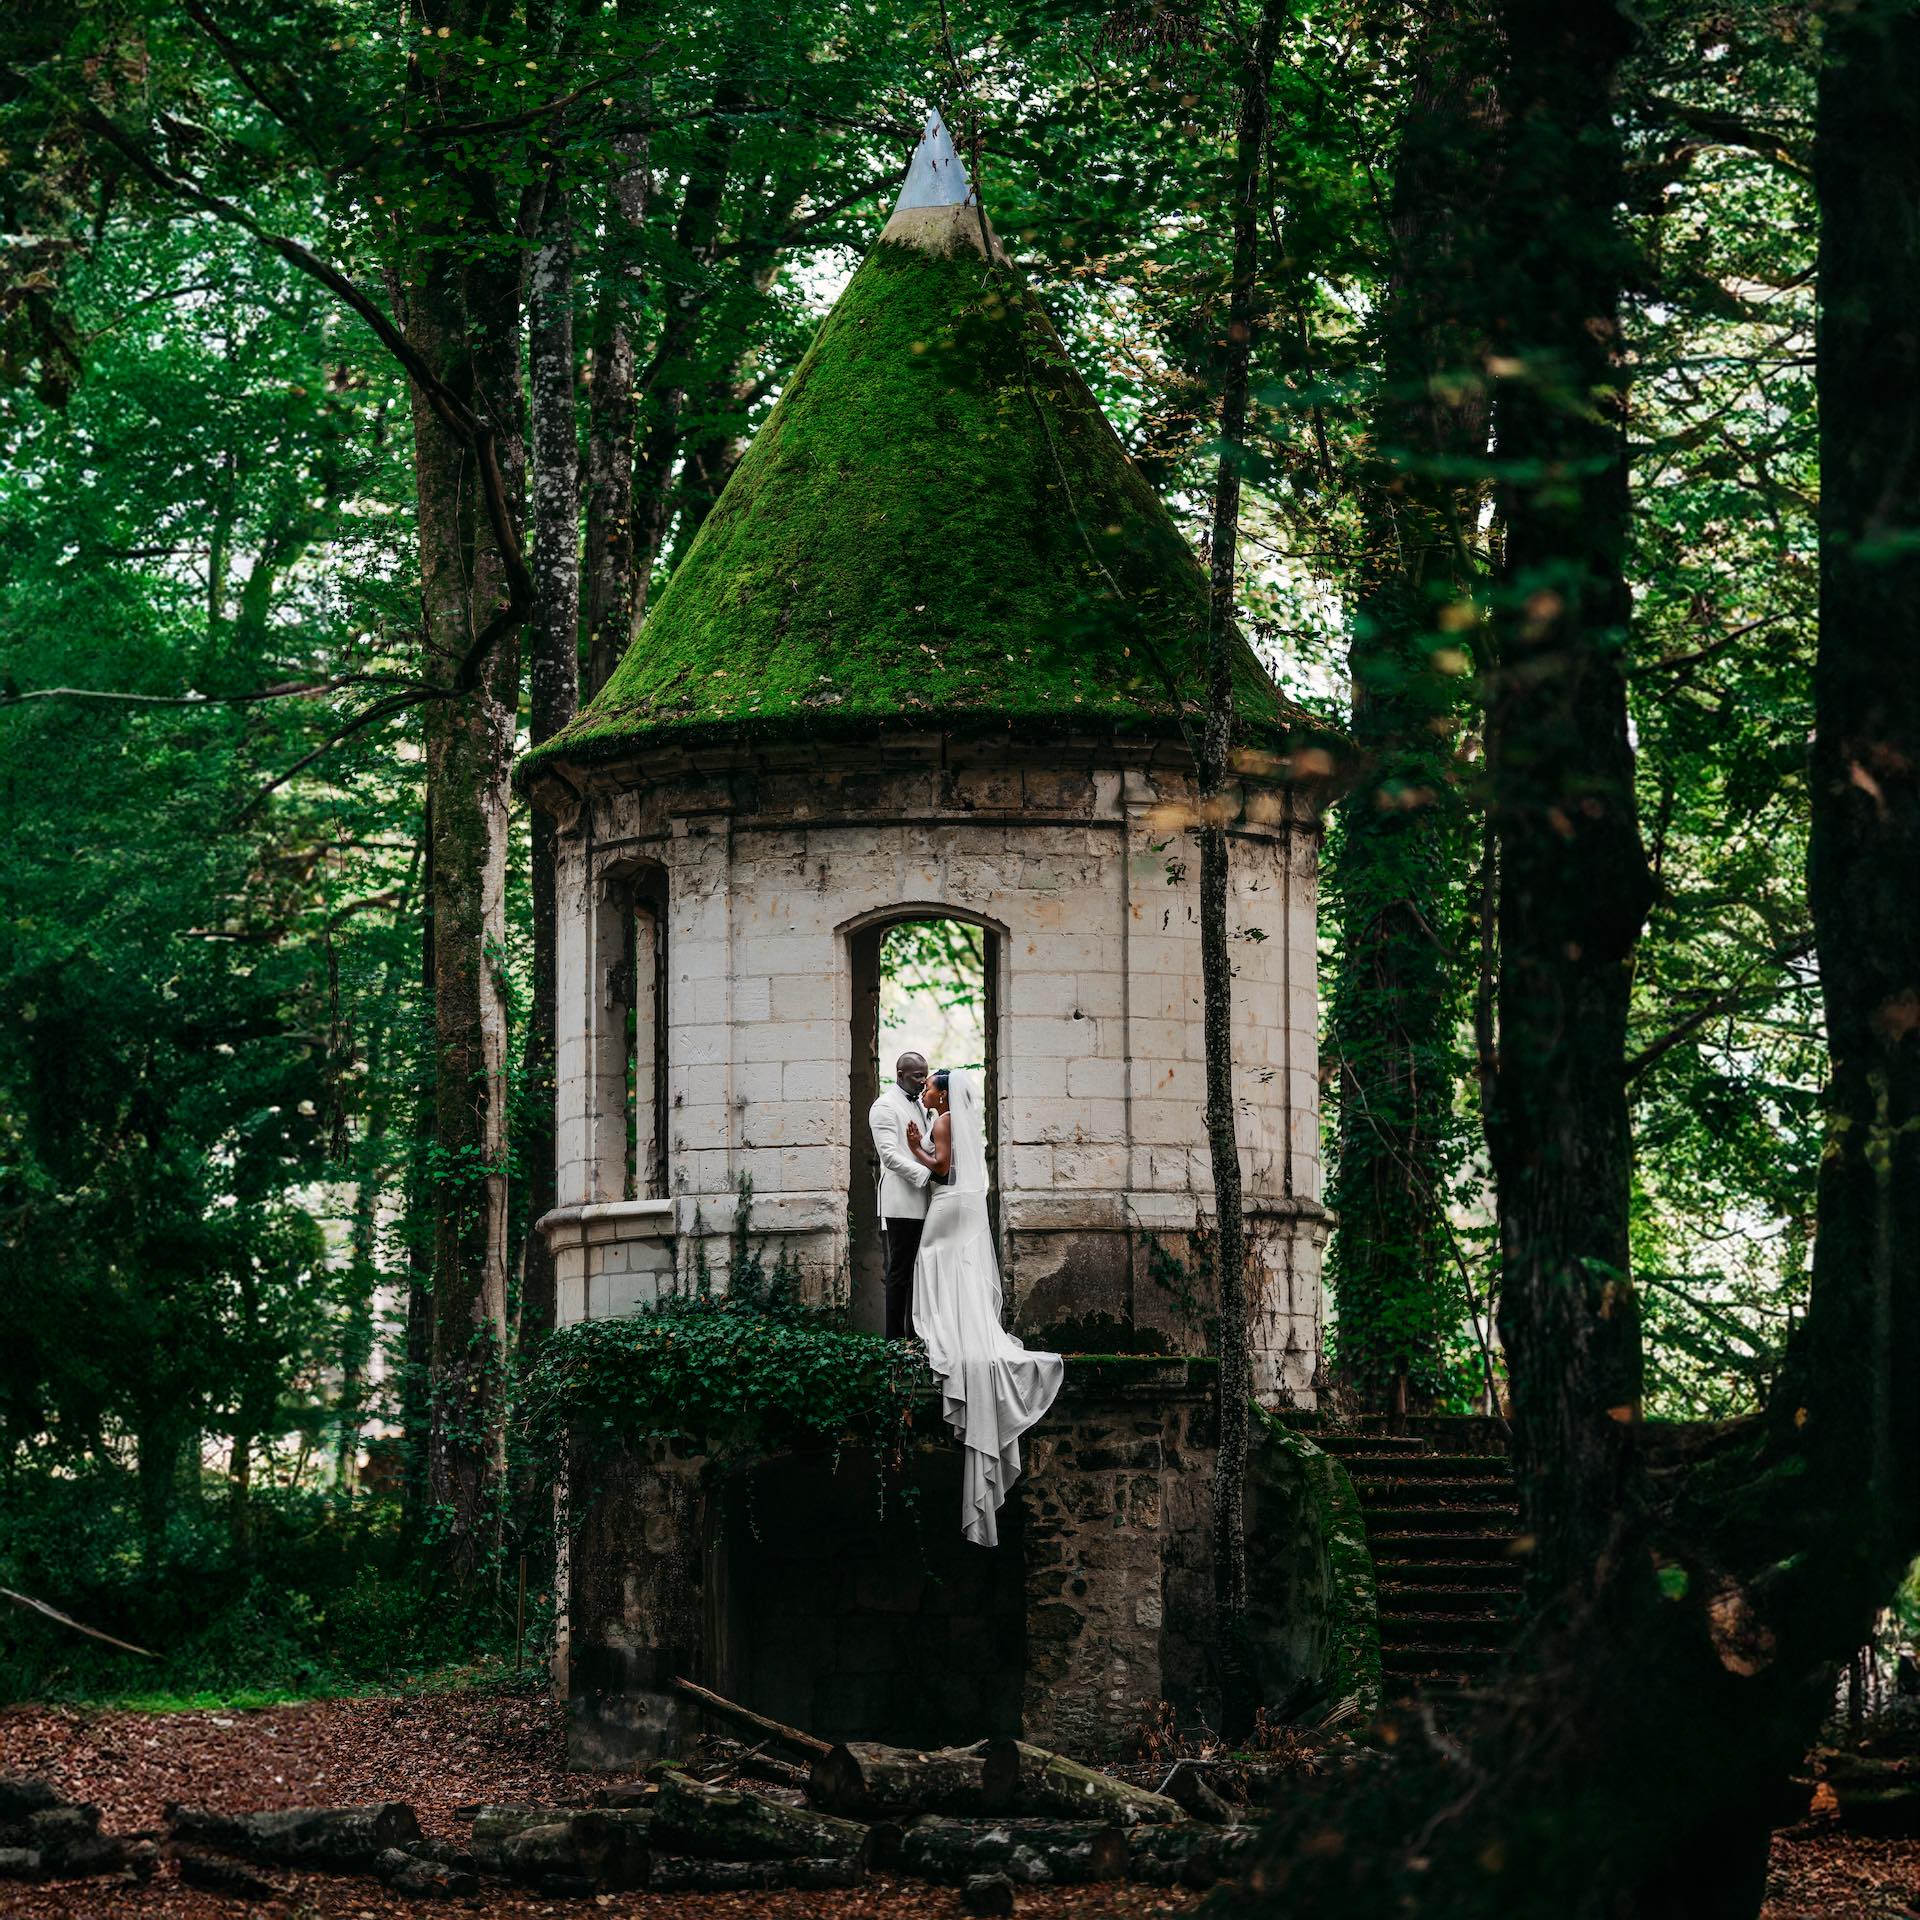 Shoot a wedding with us | Loire Valley, France - Photo & Cinema